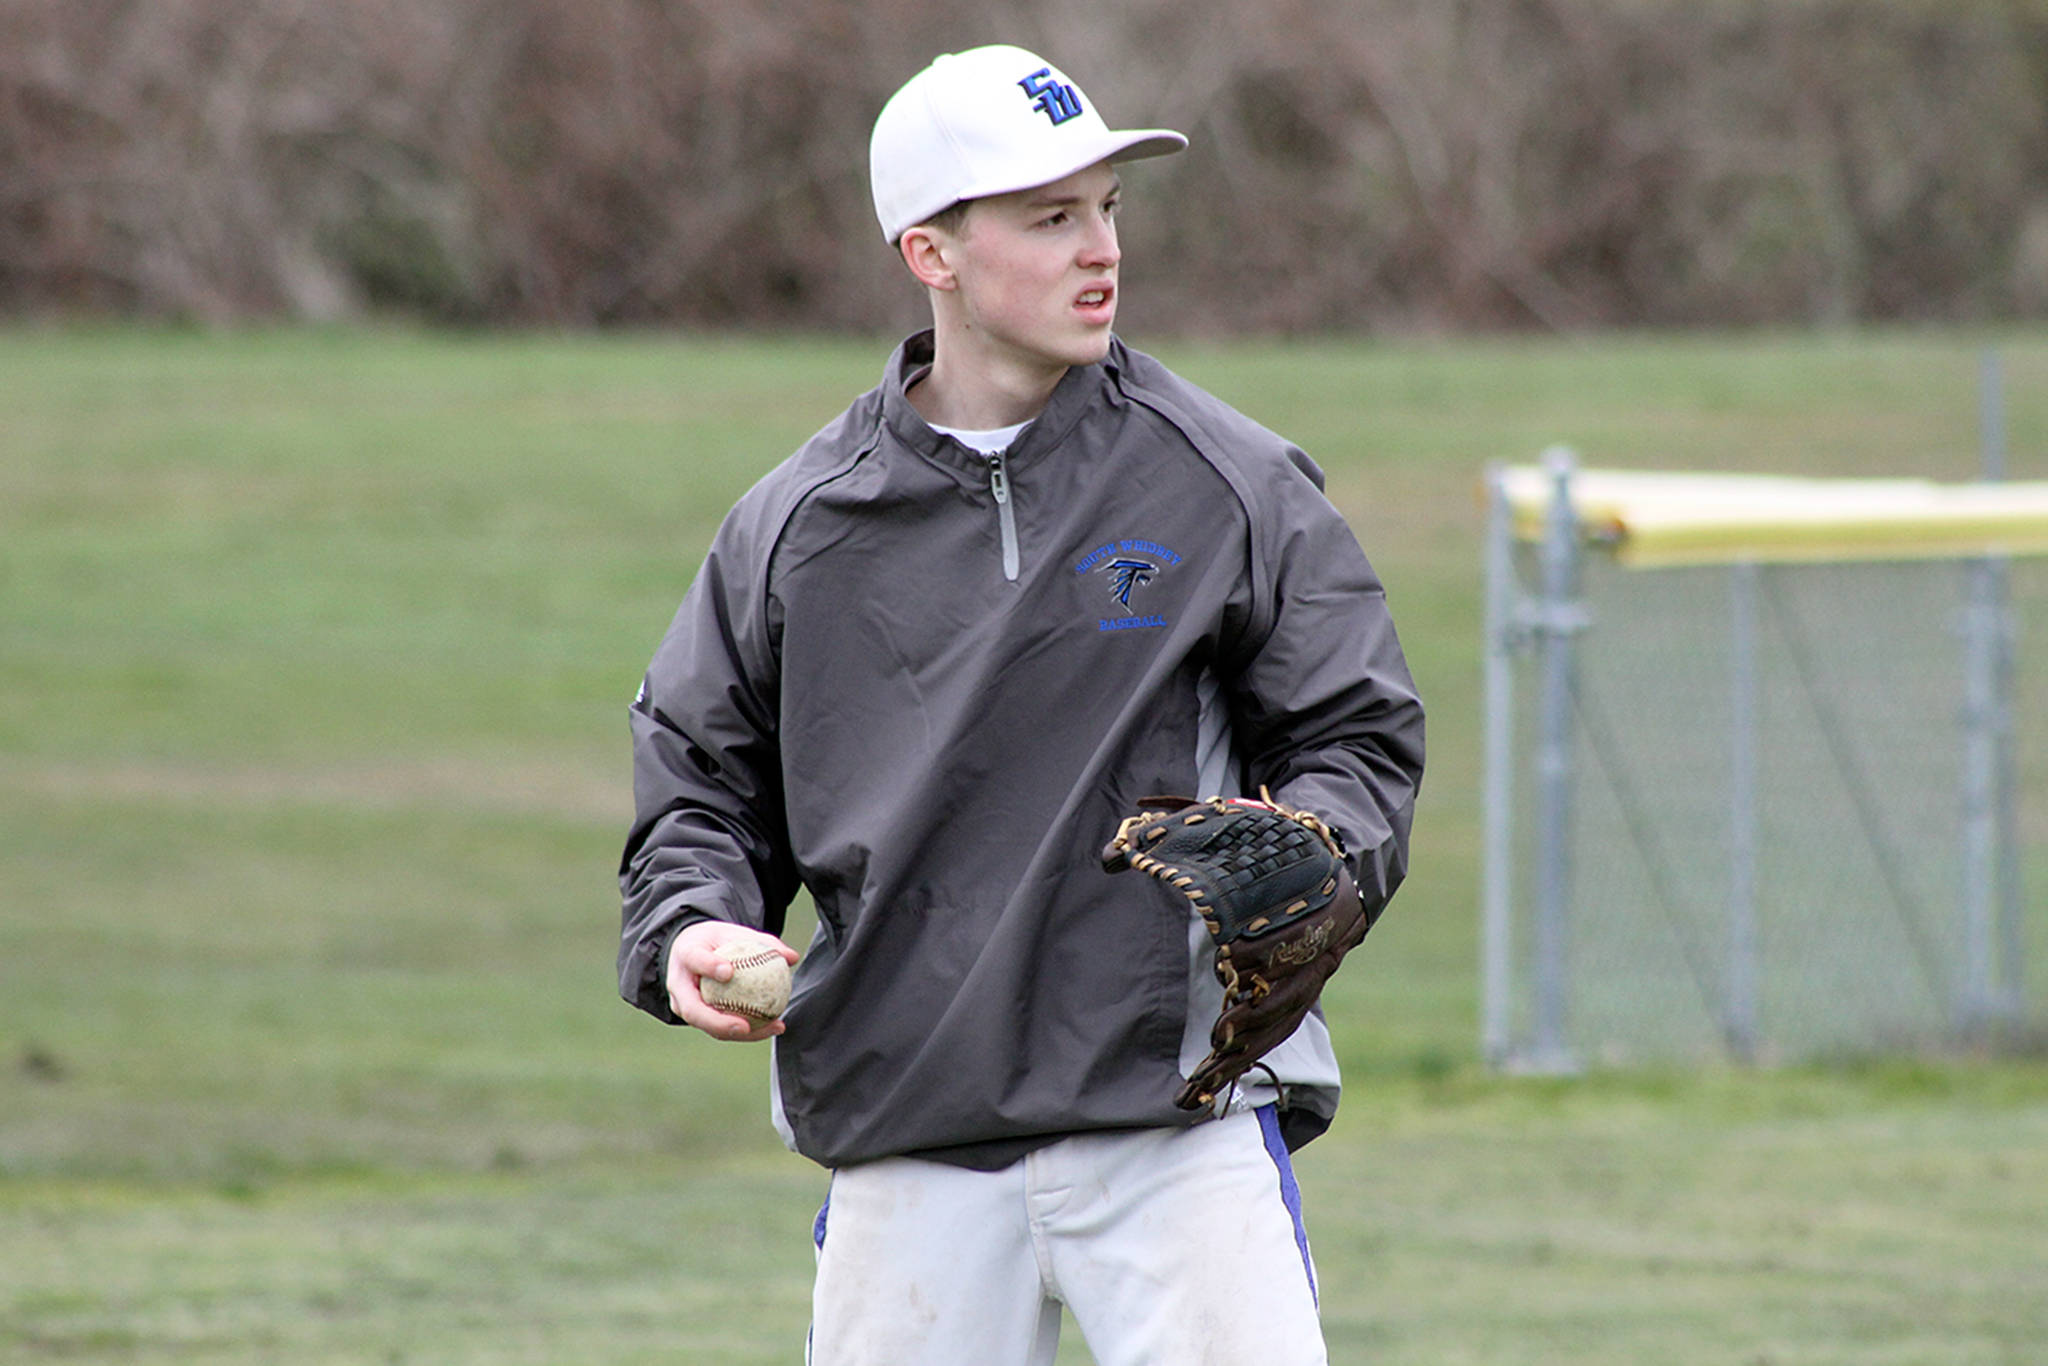 Sluggers to rely on experience from last season | SPRING SPORTS PREVIEW